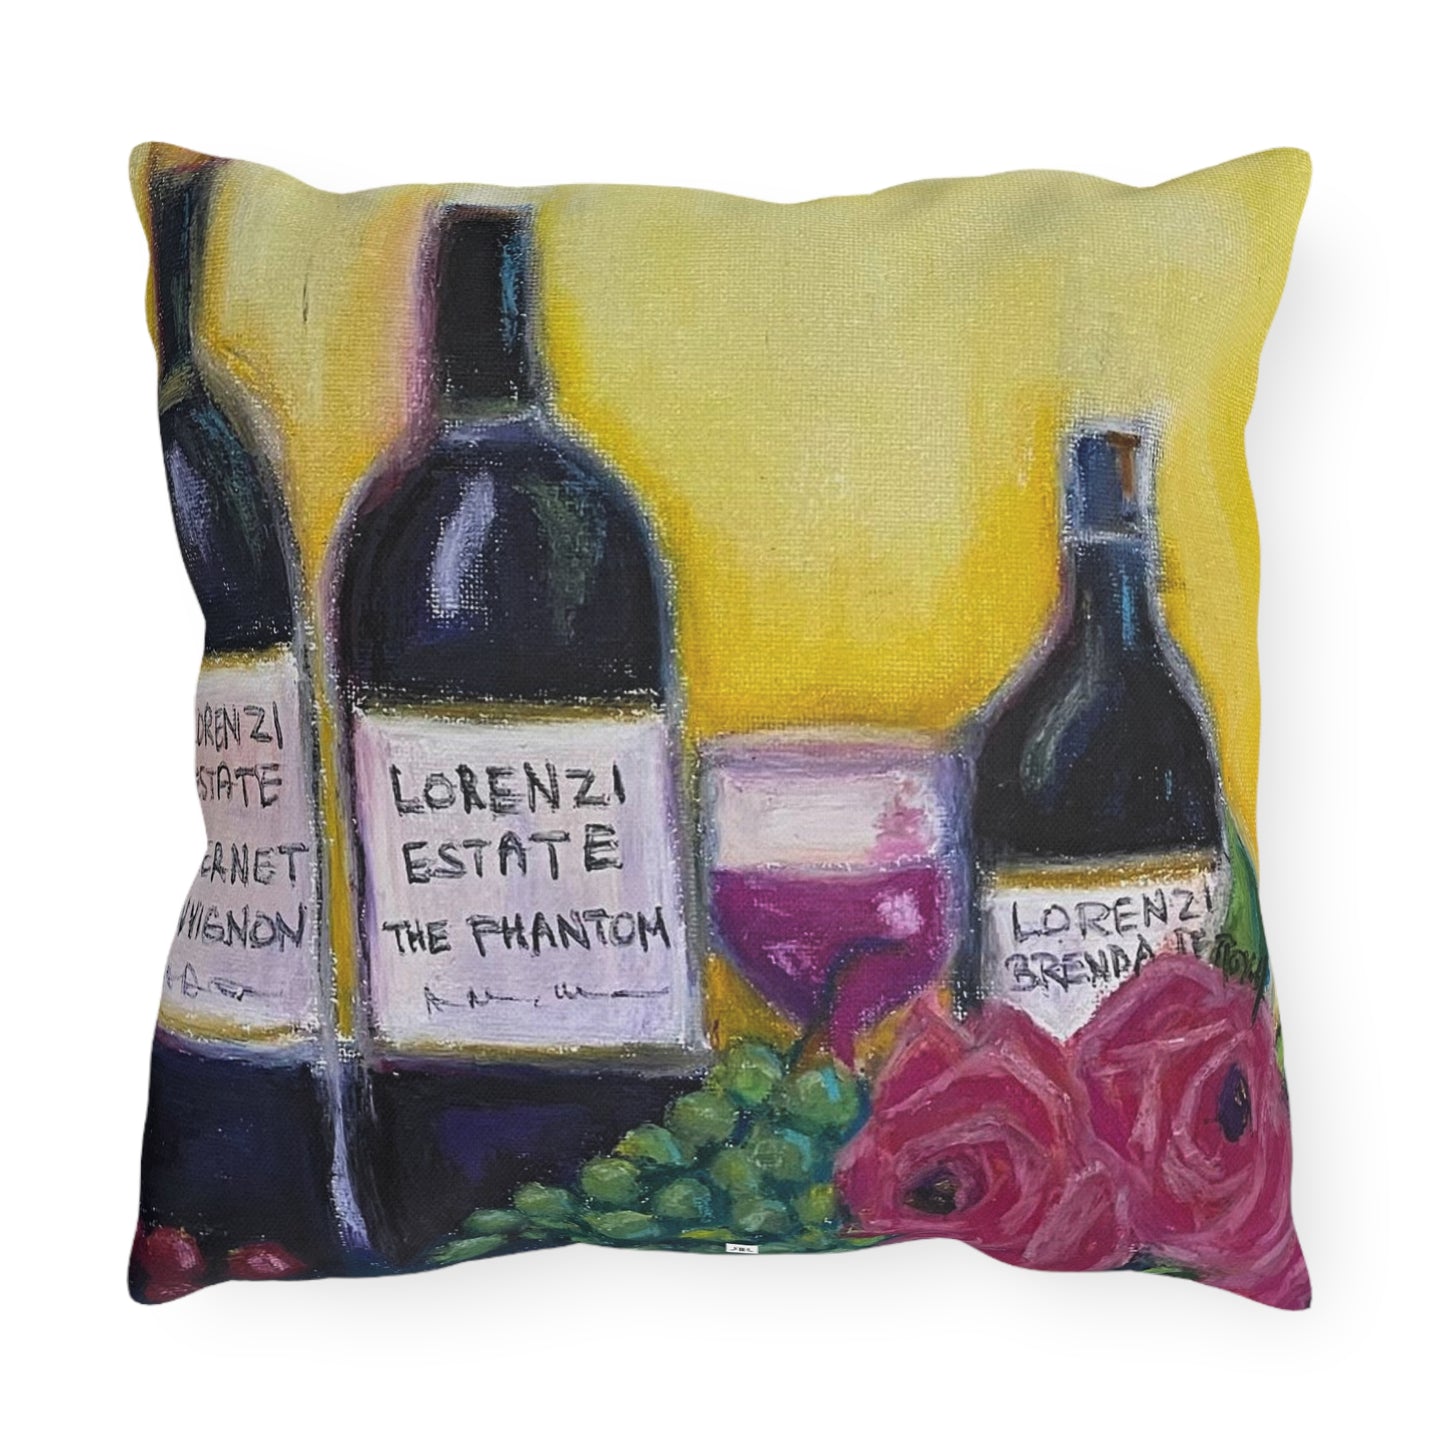 Lorenzi Estate Wine and Roses Outdoor Pillows